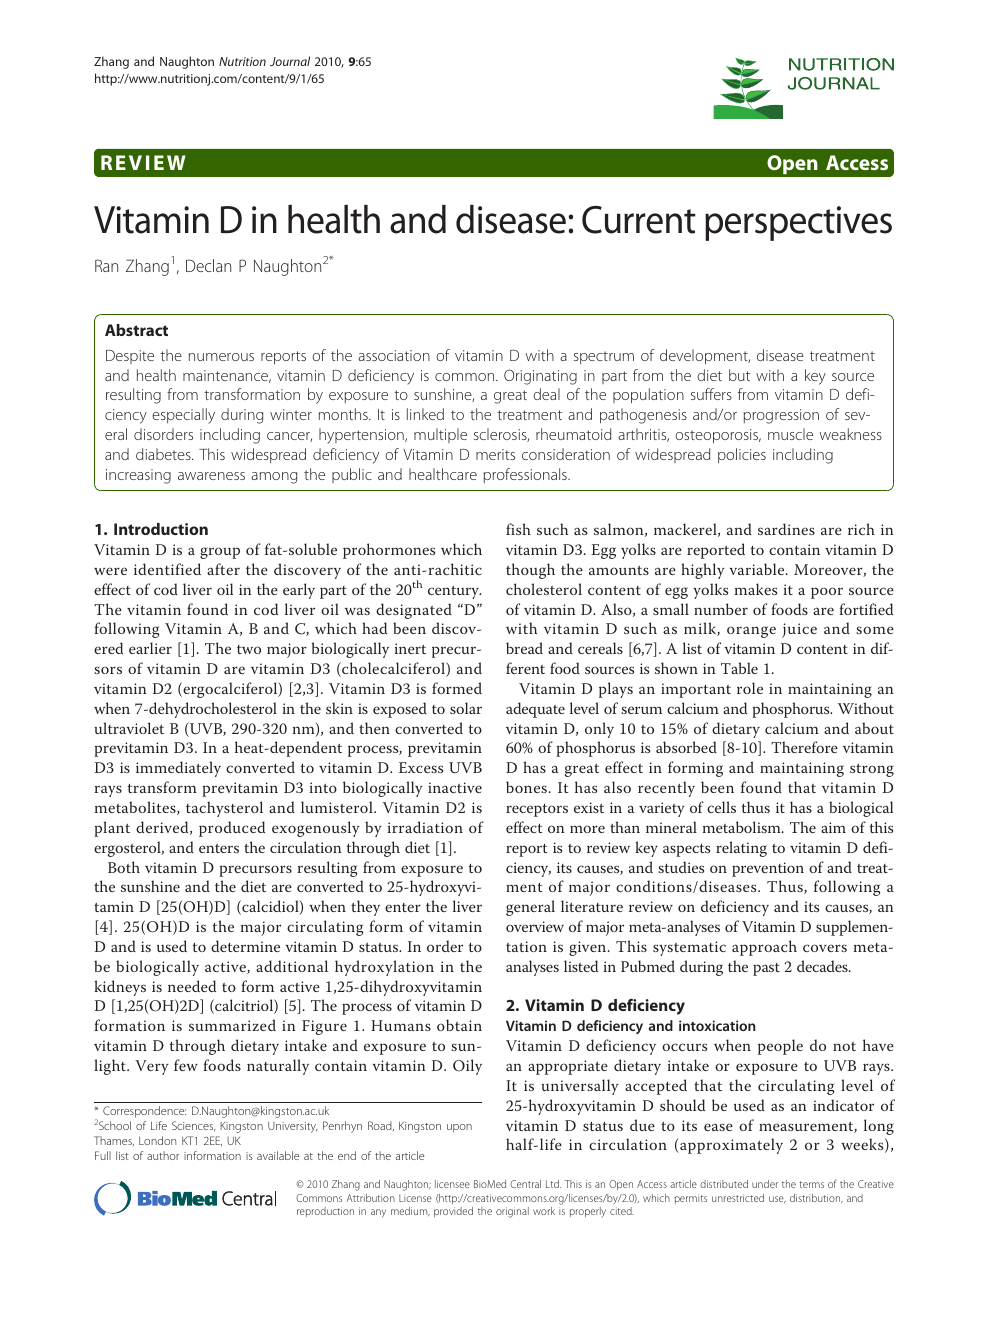 Vitamin D In Health And Disease Current Perspectives